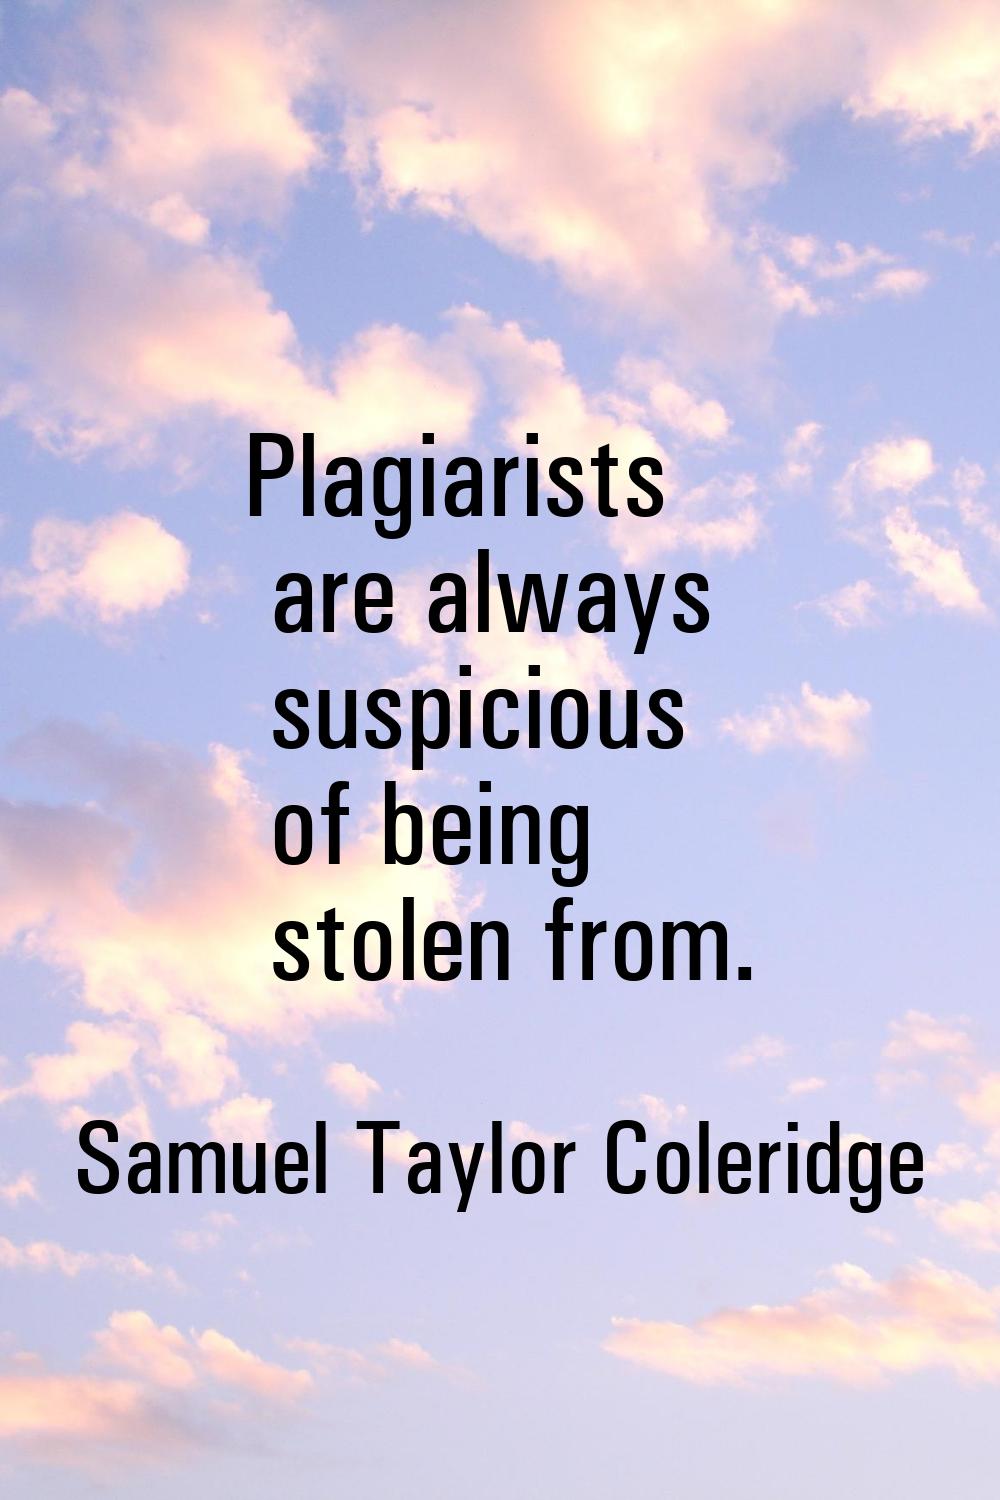 Plagiarists are always suspicious of being stolen from.